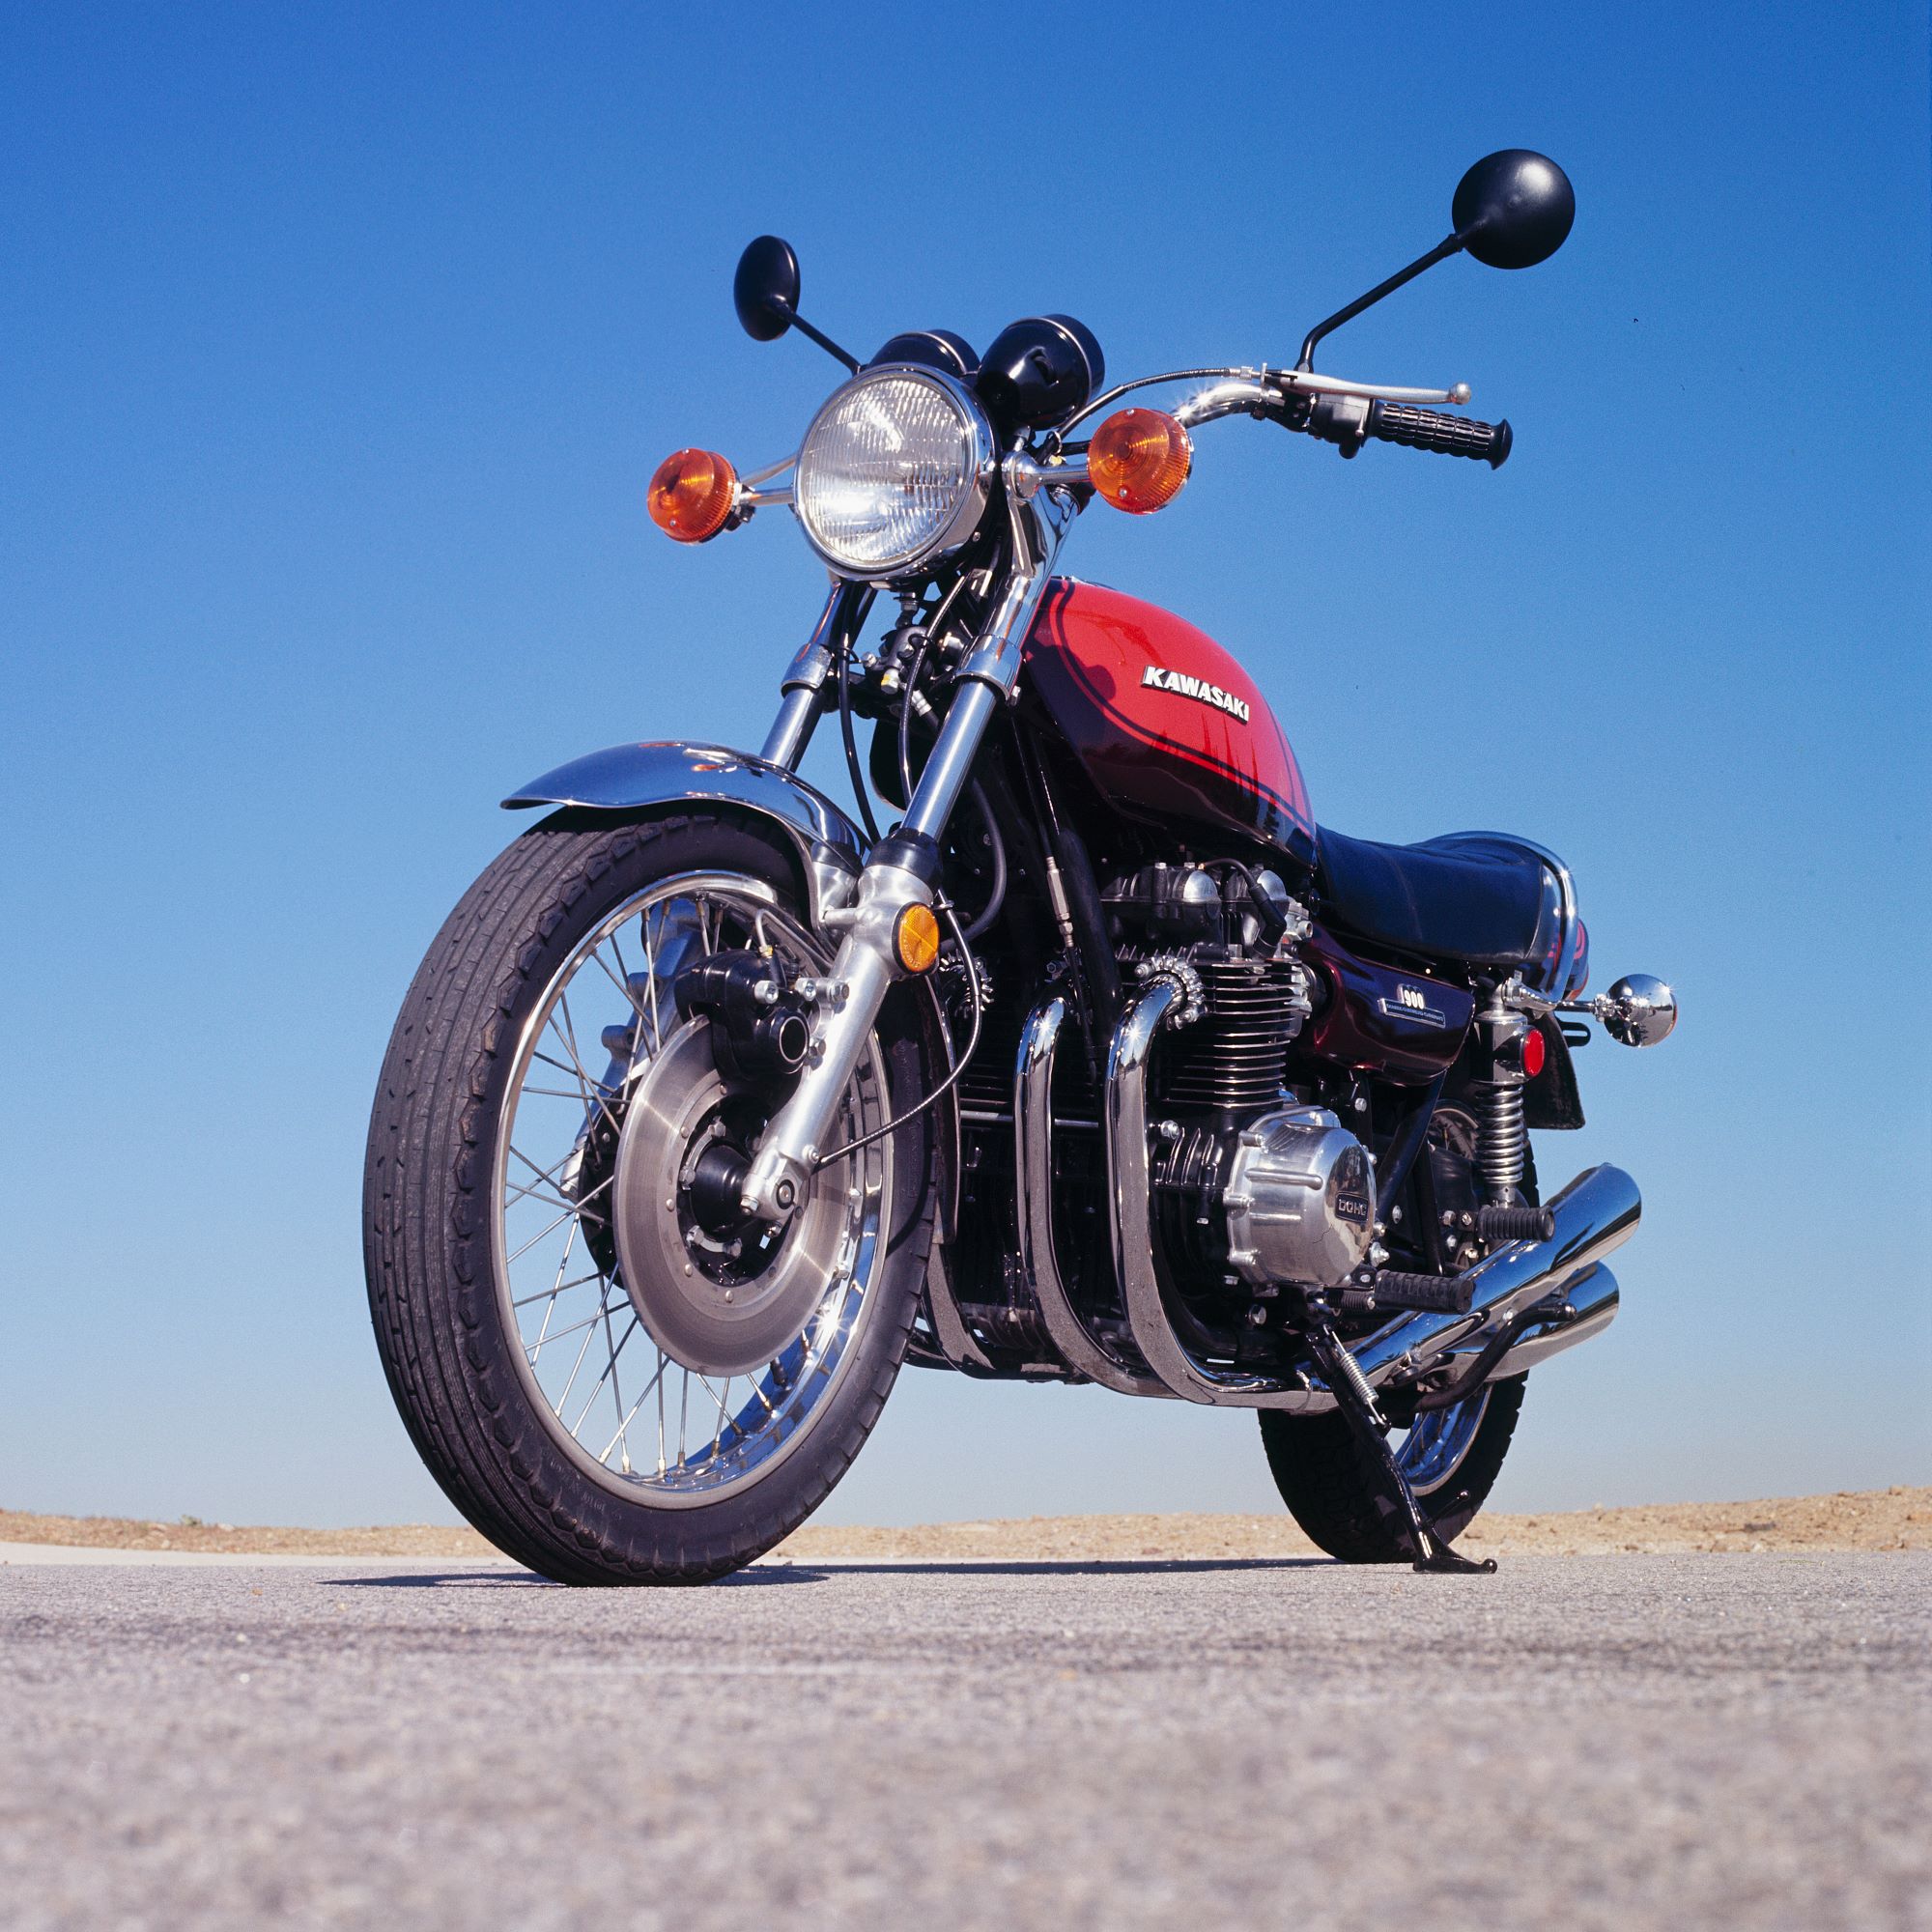 A low-angle front 3/4 view of an orange-and-brown 1973 Kawasaki Z1 900 on a desert road